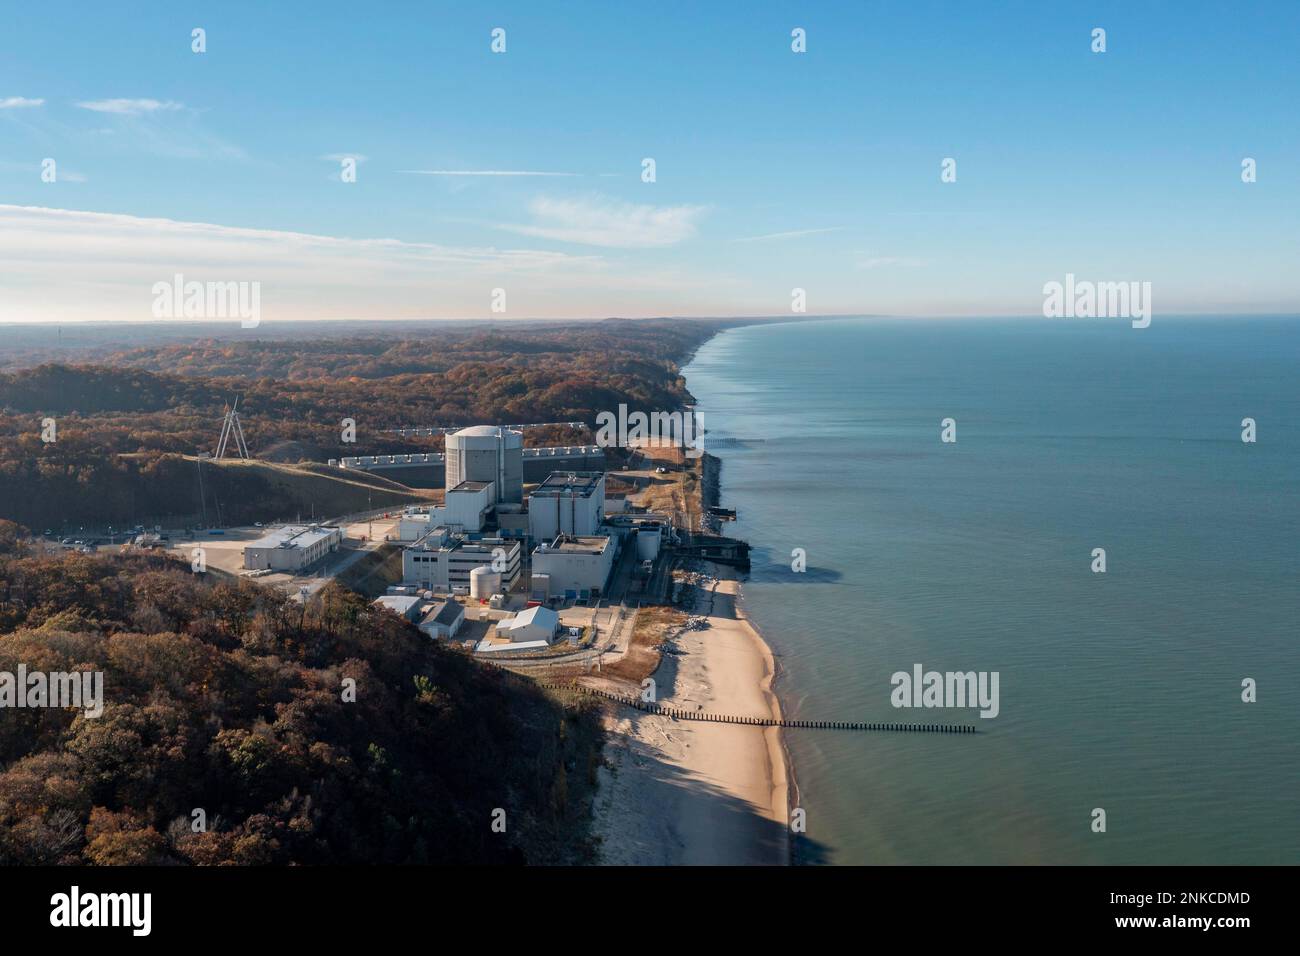 The Palisades nuclear power plant on the shore of Lake Michigan, South Haven, Michigan, USA Stock Photo